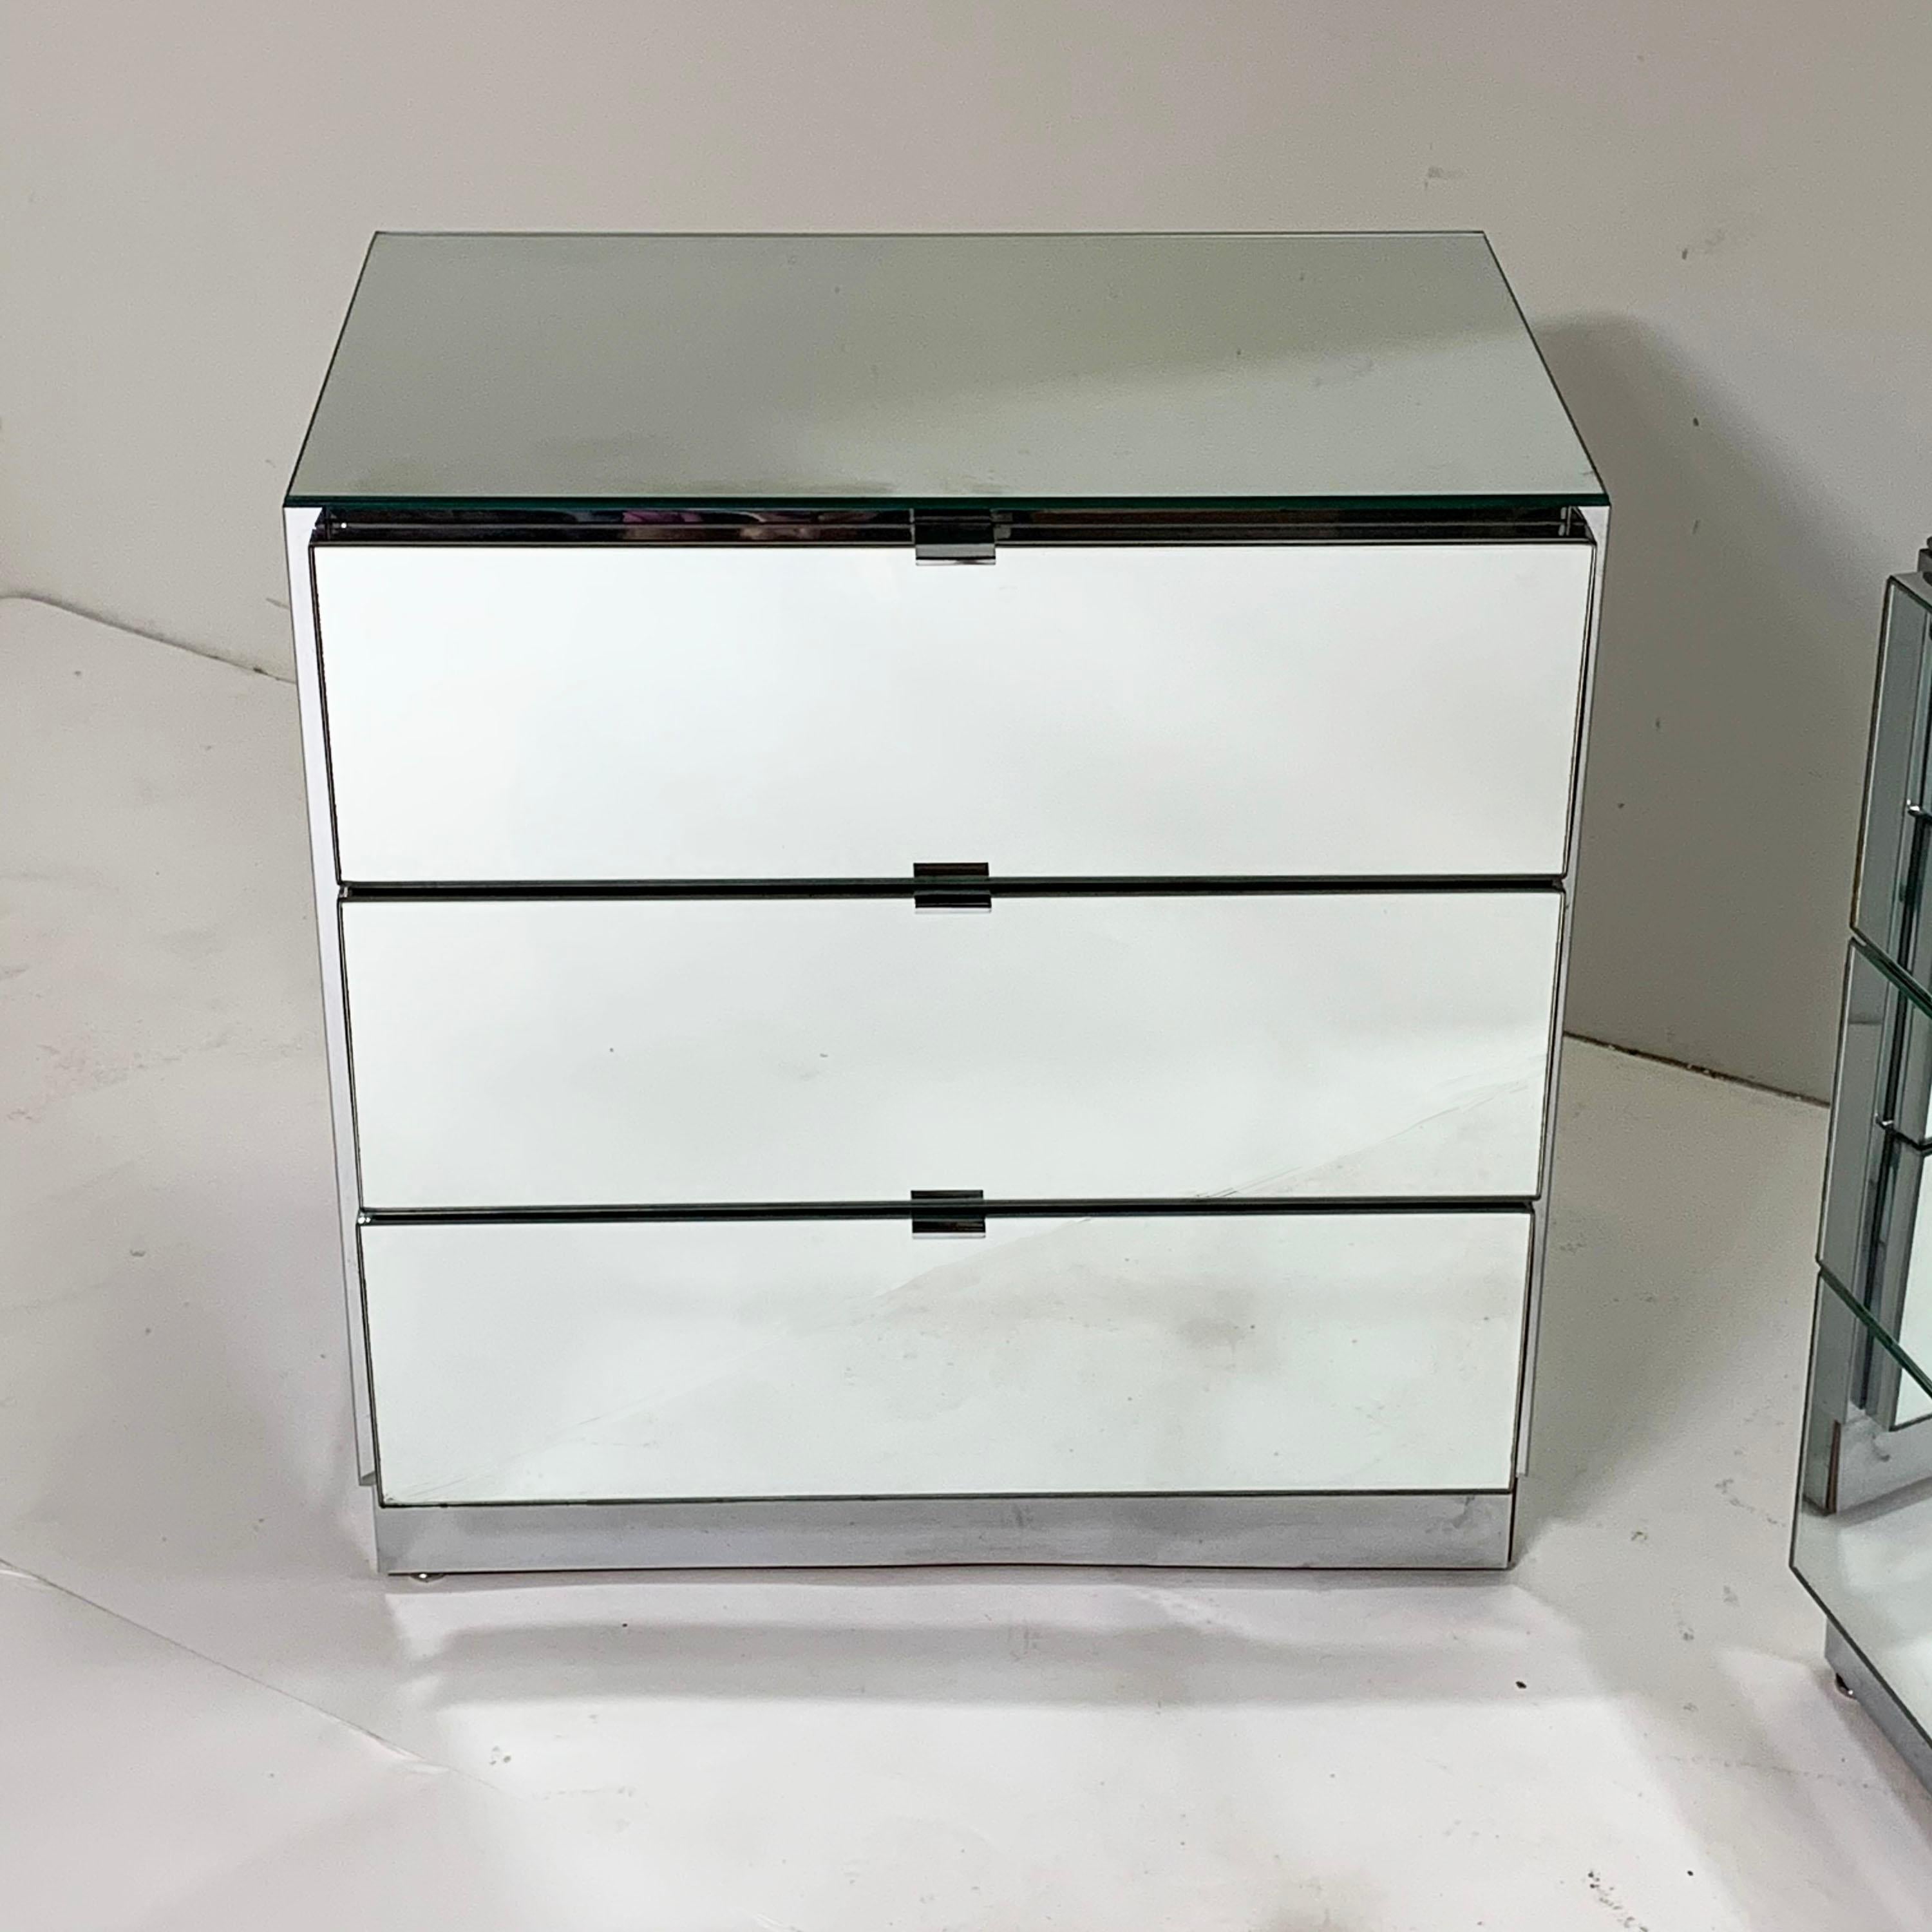 Pair of three-drawer cabinets or nightstands by Ello Furniture in mirrored glass and chrome, circa 1980s.